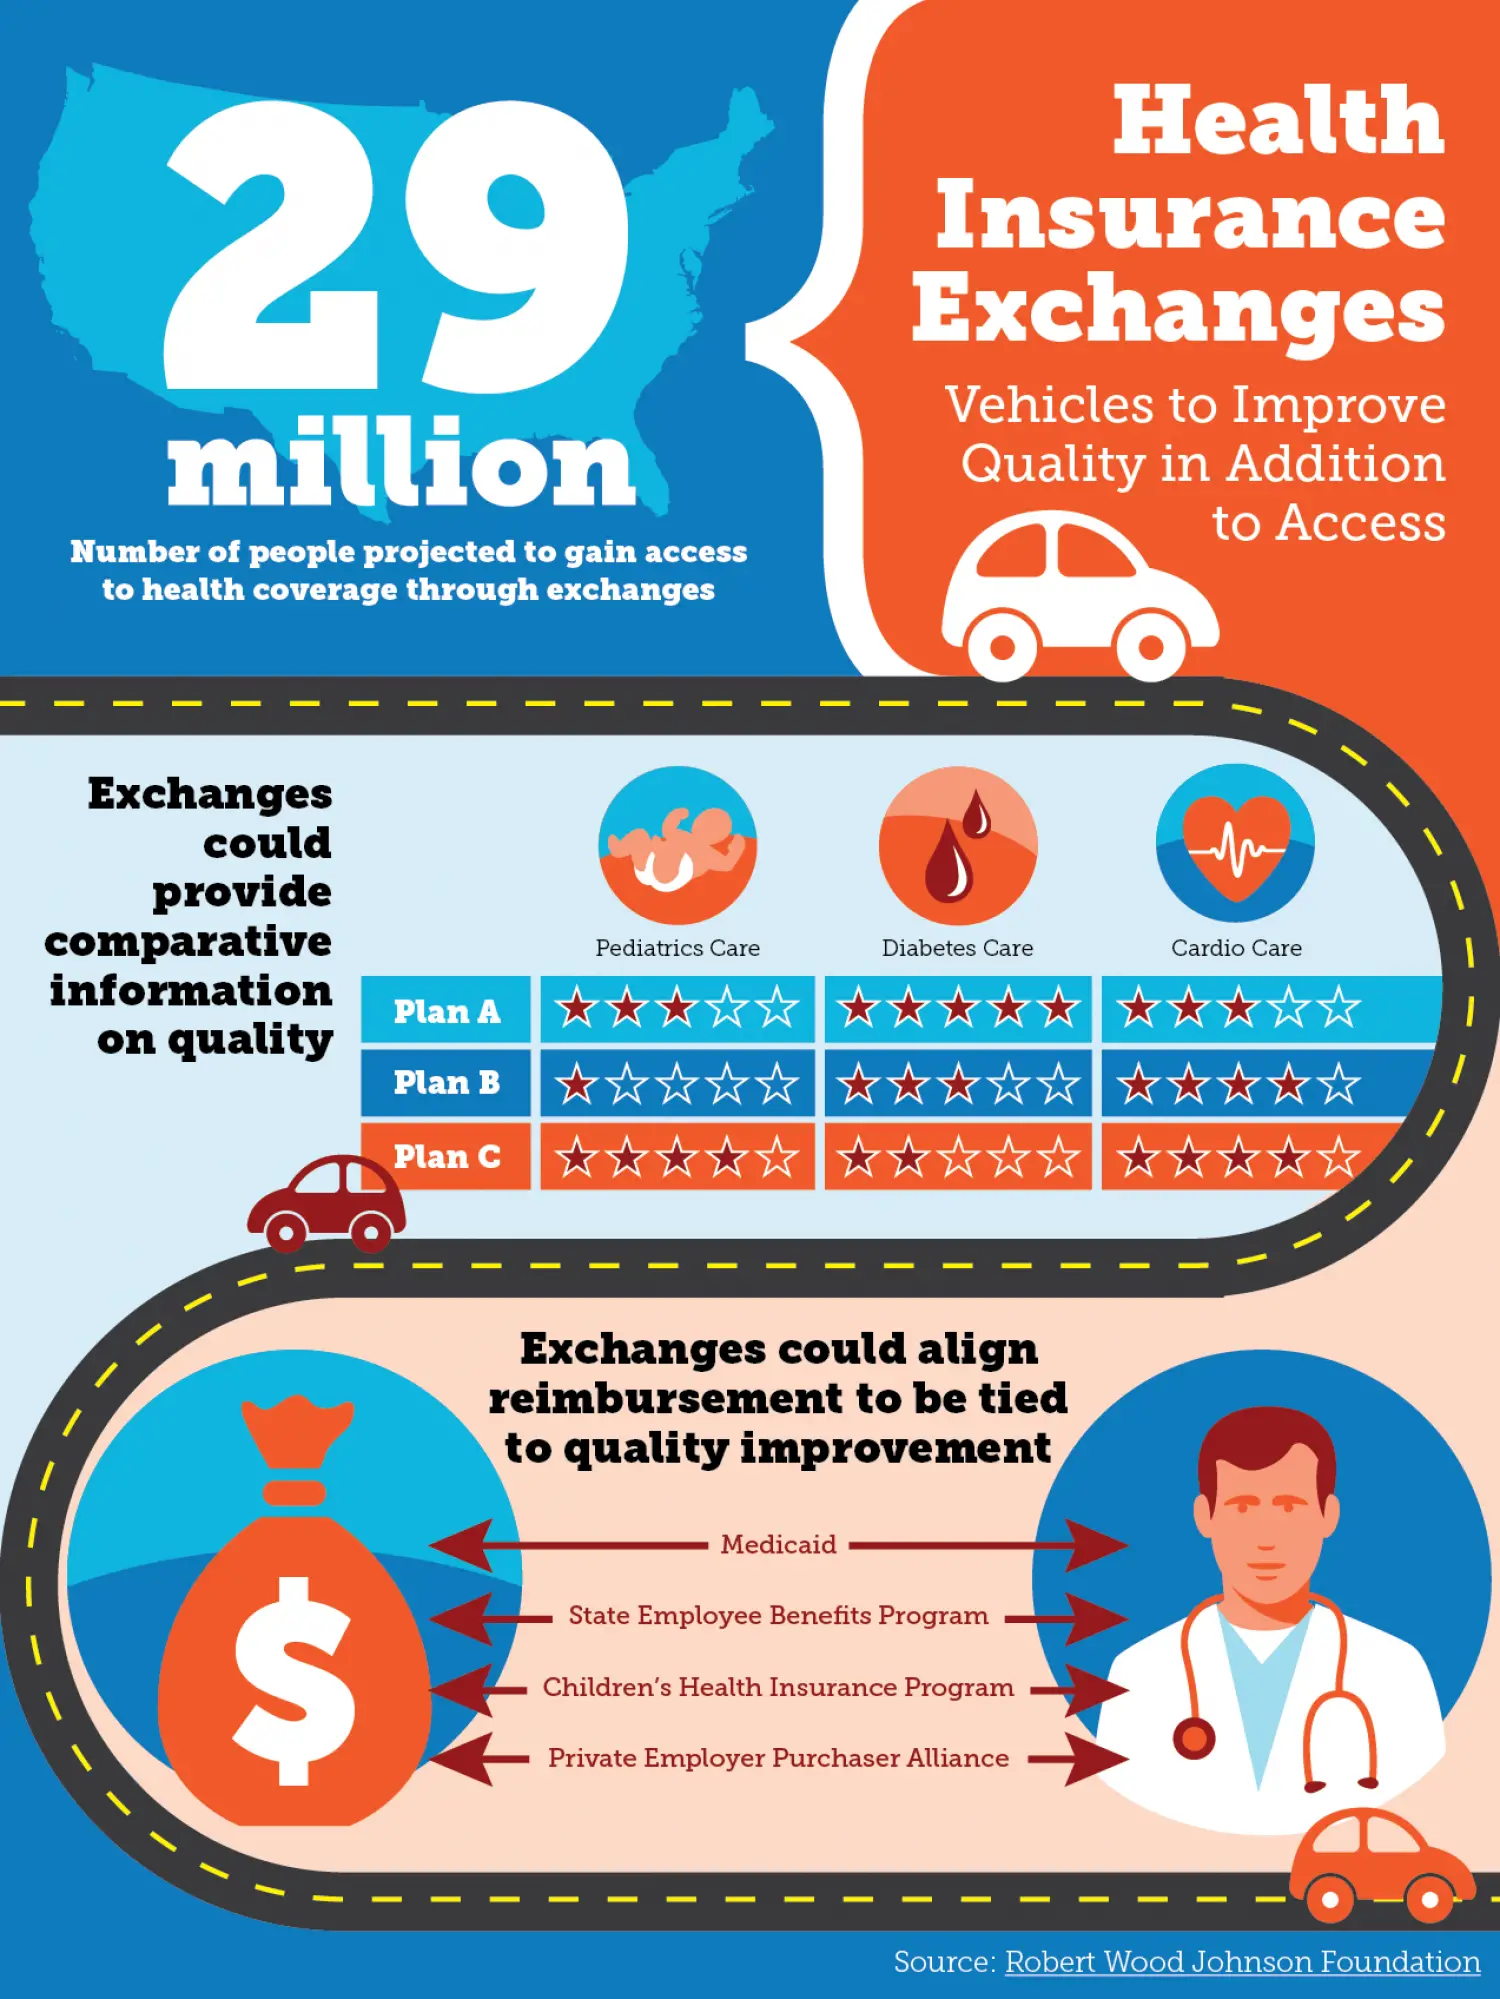 Health Insurance Exchanges